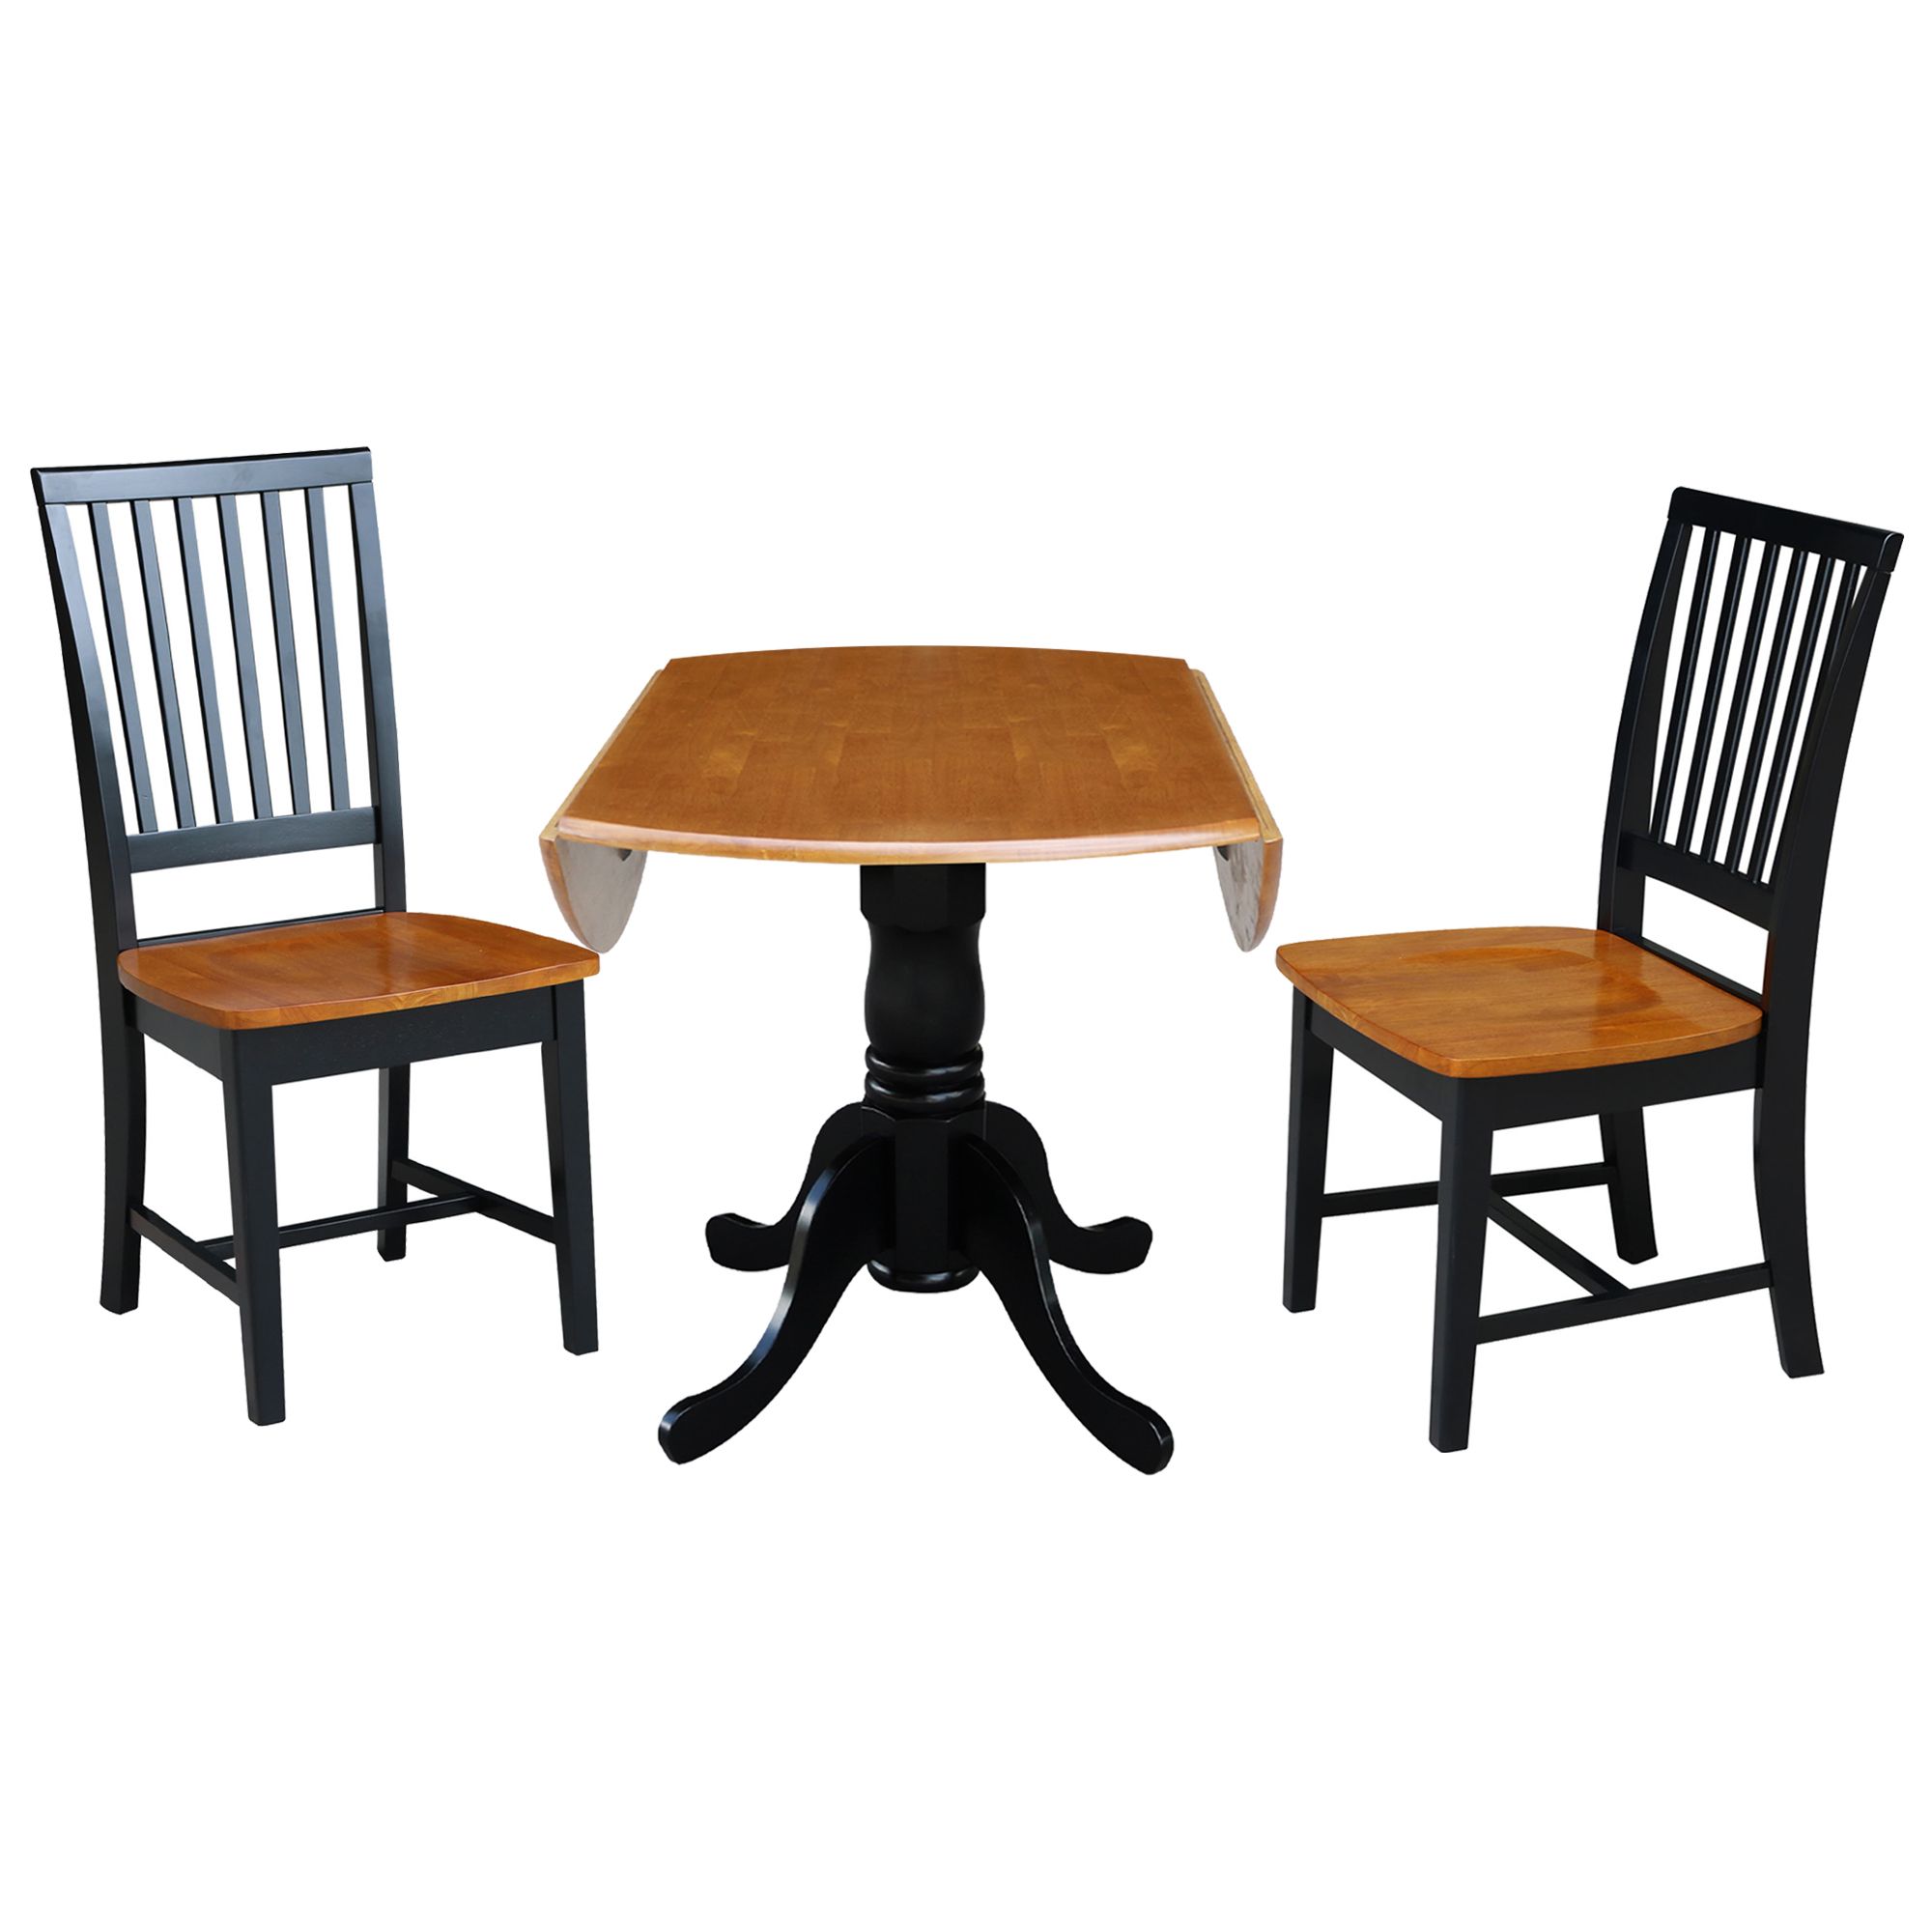 Current 42" Solid Wood Dual Drop Leaf Pedestal Dining Table With 2 Slat Back Chairs  In Black/cherryinternational Concepts – Walmart Regarding Dark Cherry Outdoor Tables (View 10 of 15)